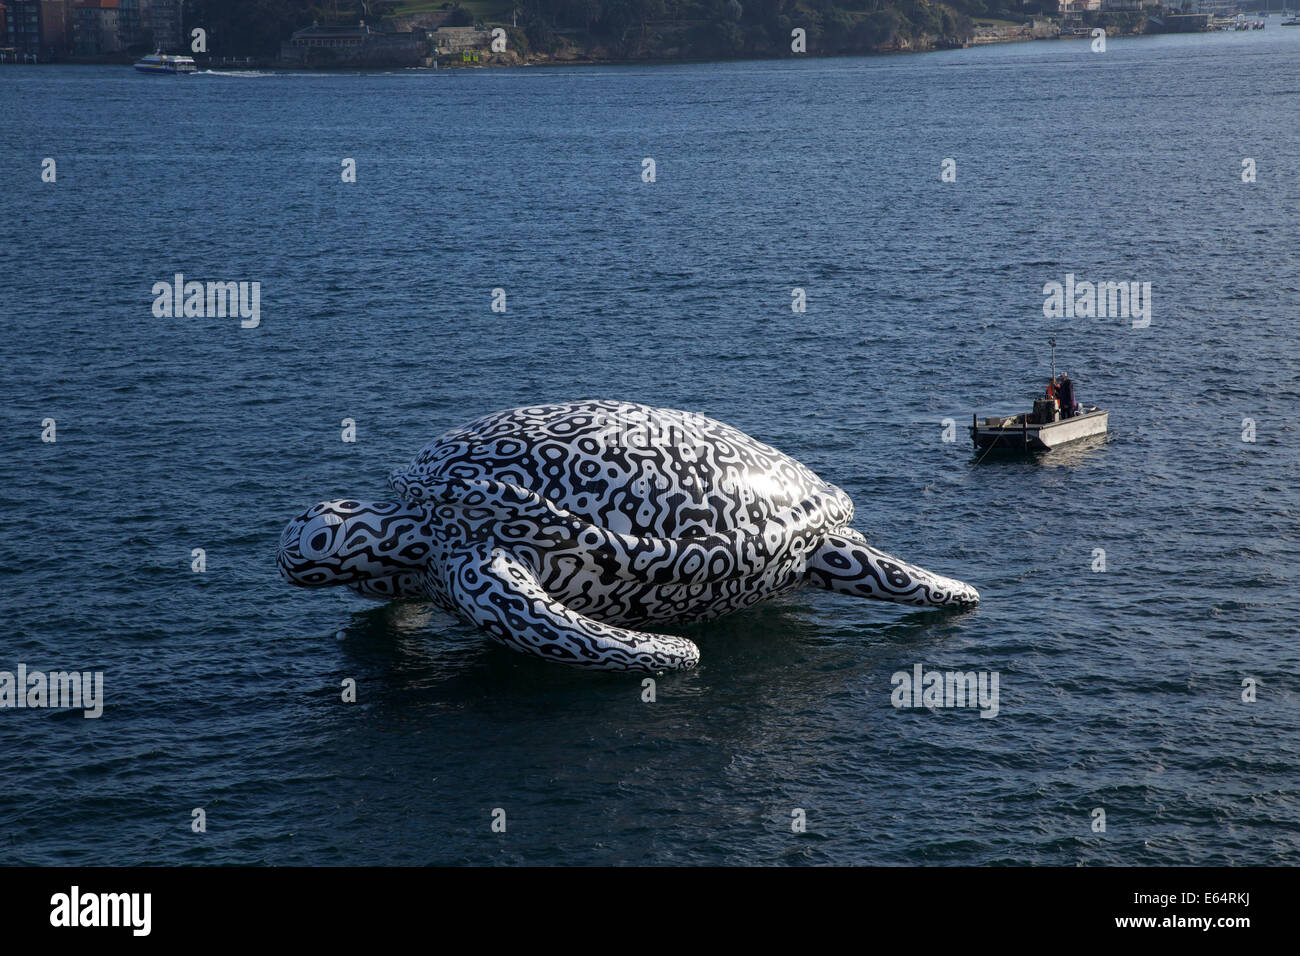 Sydney, NSW 2000, Australia. 15 August 2014. To celebrate the opening of World's first Undersea Art Exhibition at Sydney Aquarium a giant 15m floating sea turtle sculpture appeared on Sydney Harbour. Copyright Credit:  2014 Richard Milnes/Alamy Live News. Stock Photo